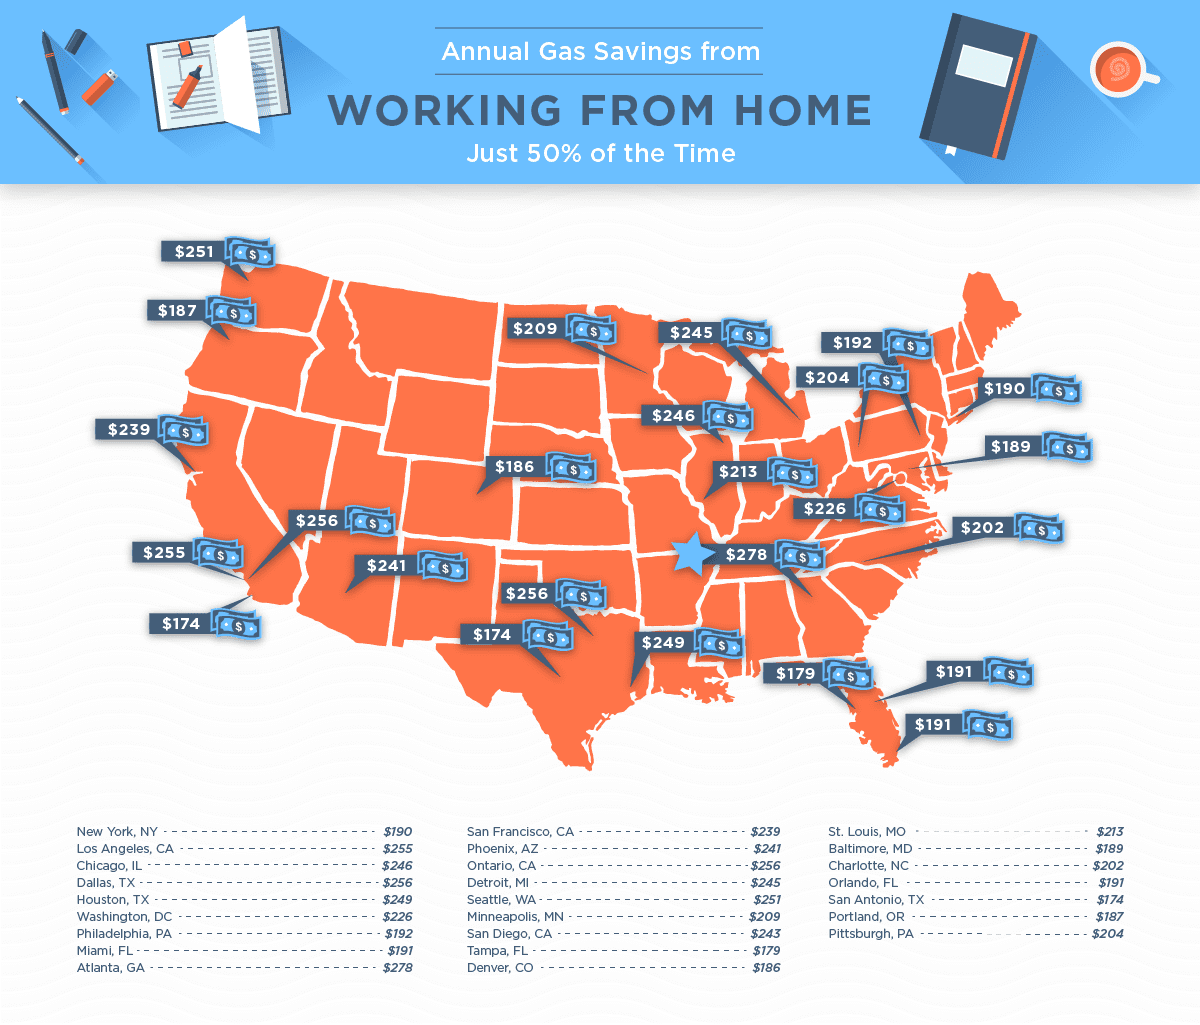 Gas savings for remote workers or employees working from home 50 percent of the time.